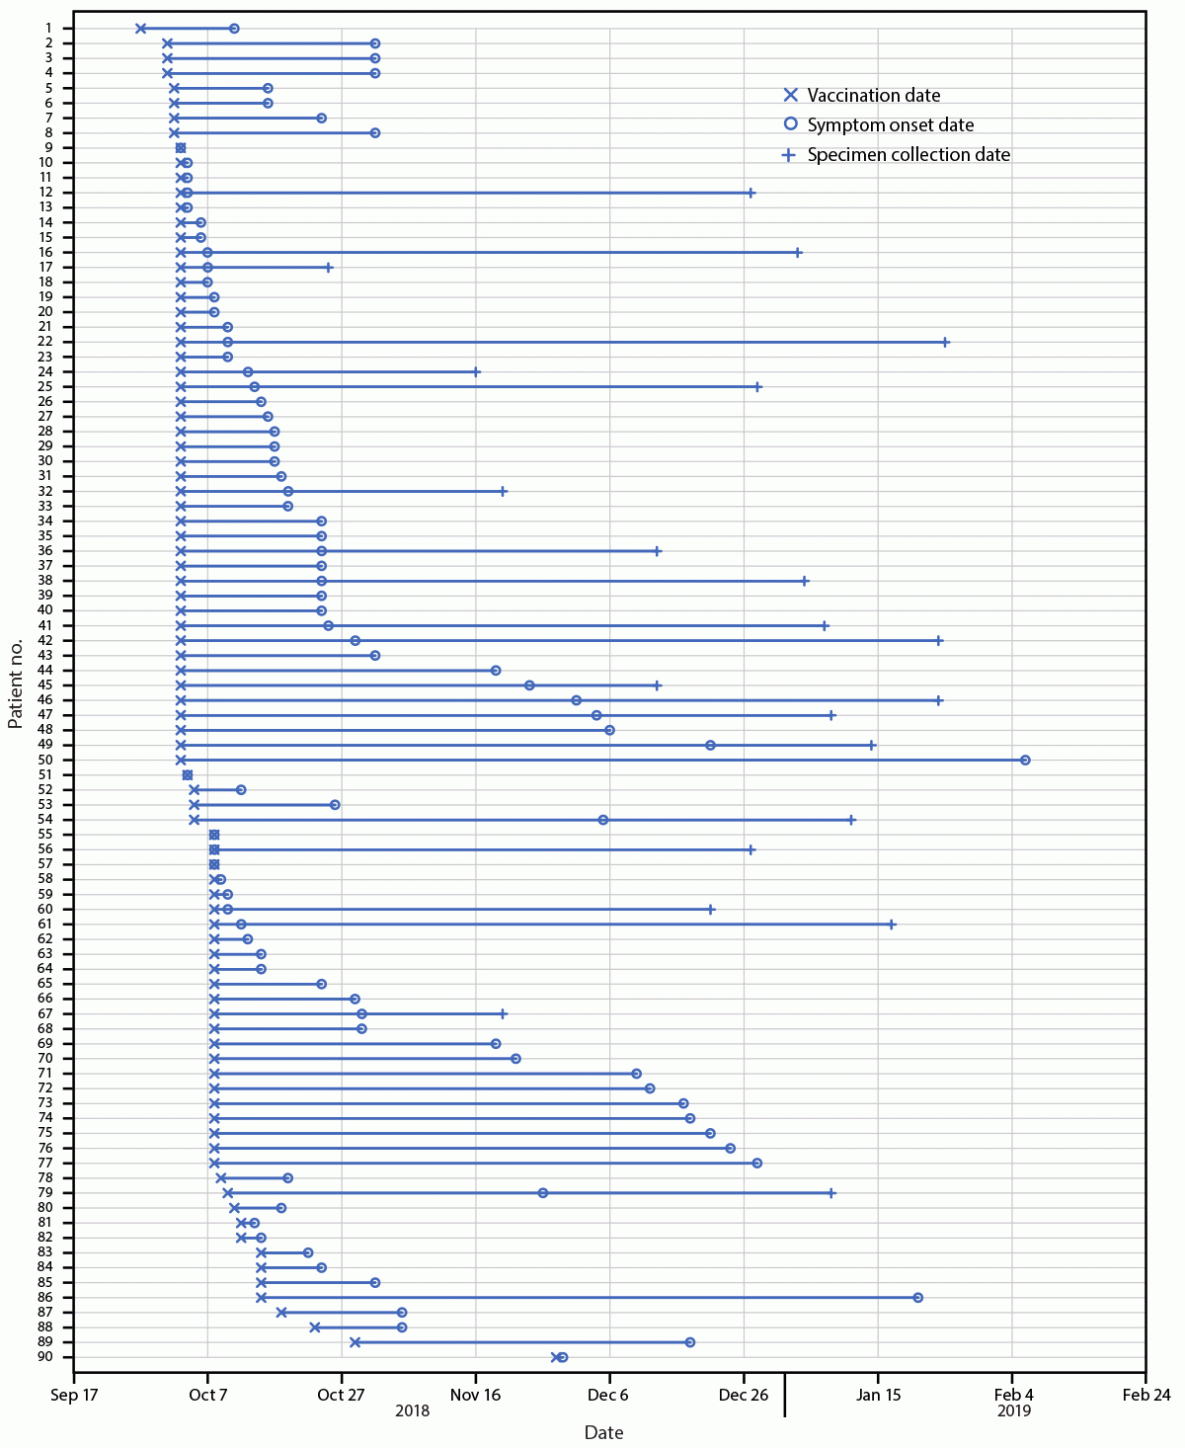 Figure is a chart showing date of vaccination, symptom onset and specimen collection in 90 patients with vaccination-associated adverse events after vaccination by company A in Indiana, Kentucky, and Ohio during September 2018–February 2019.